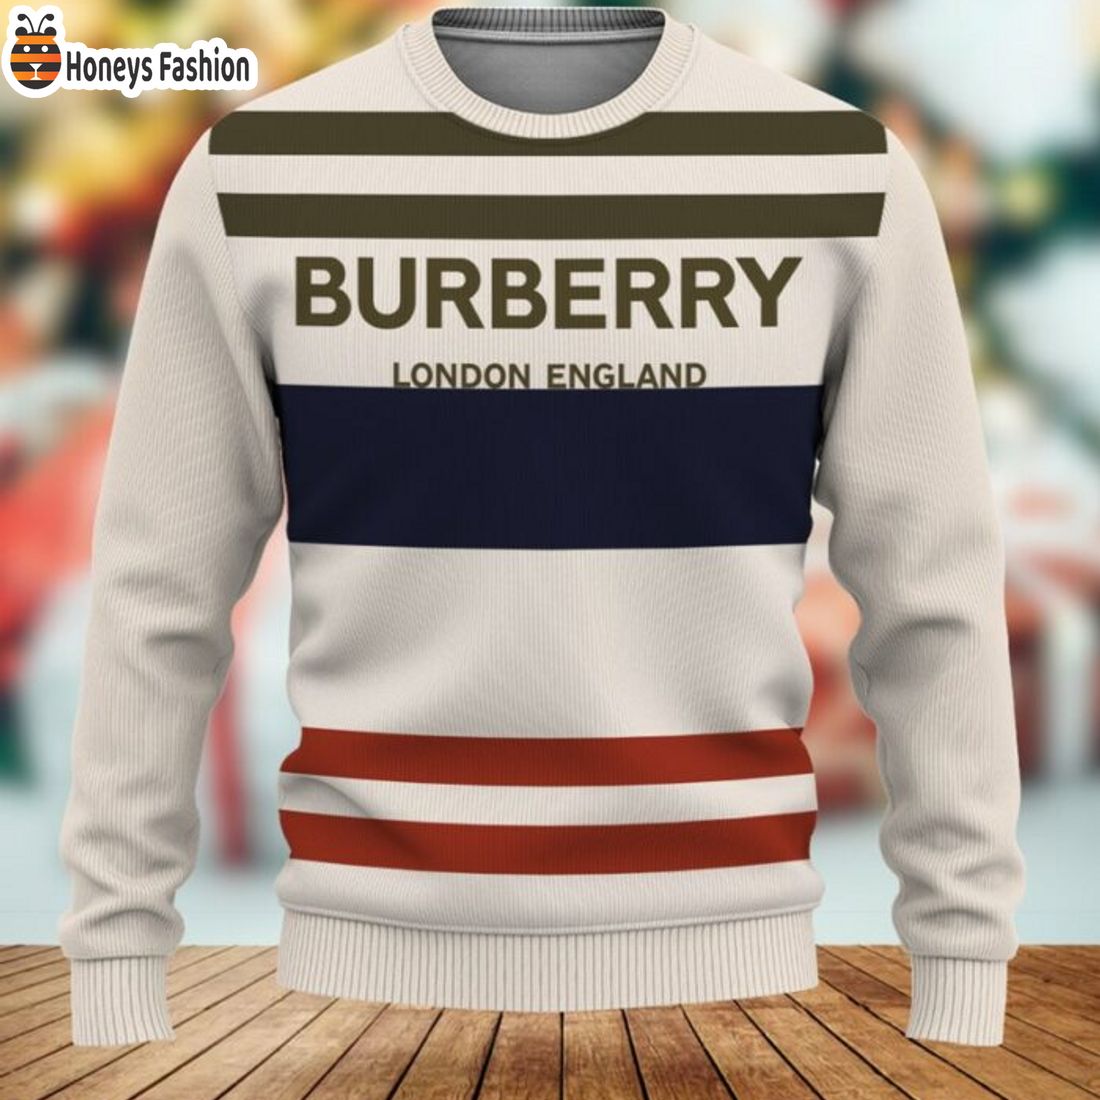 TOP SELLER Burberry London England Luxury Brand 2023 Ugly Christmas Sweater